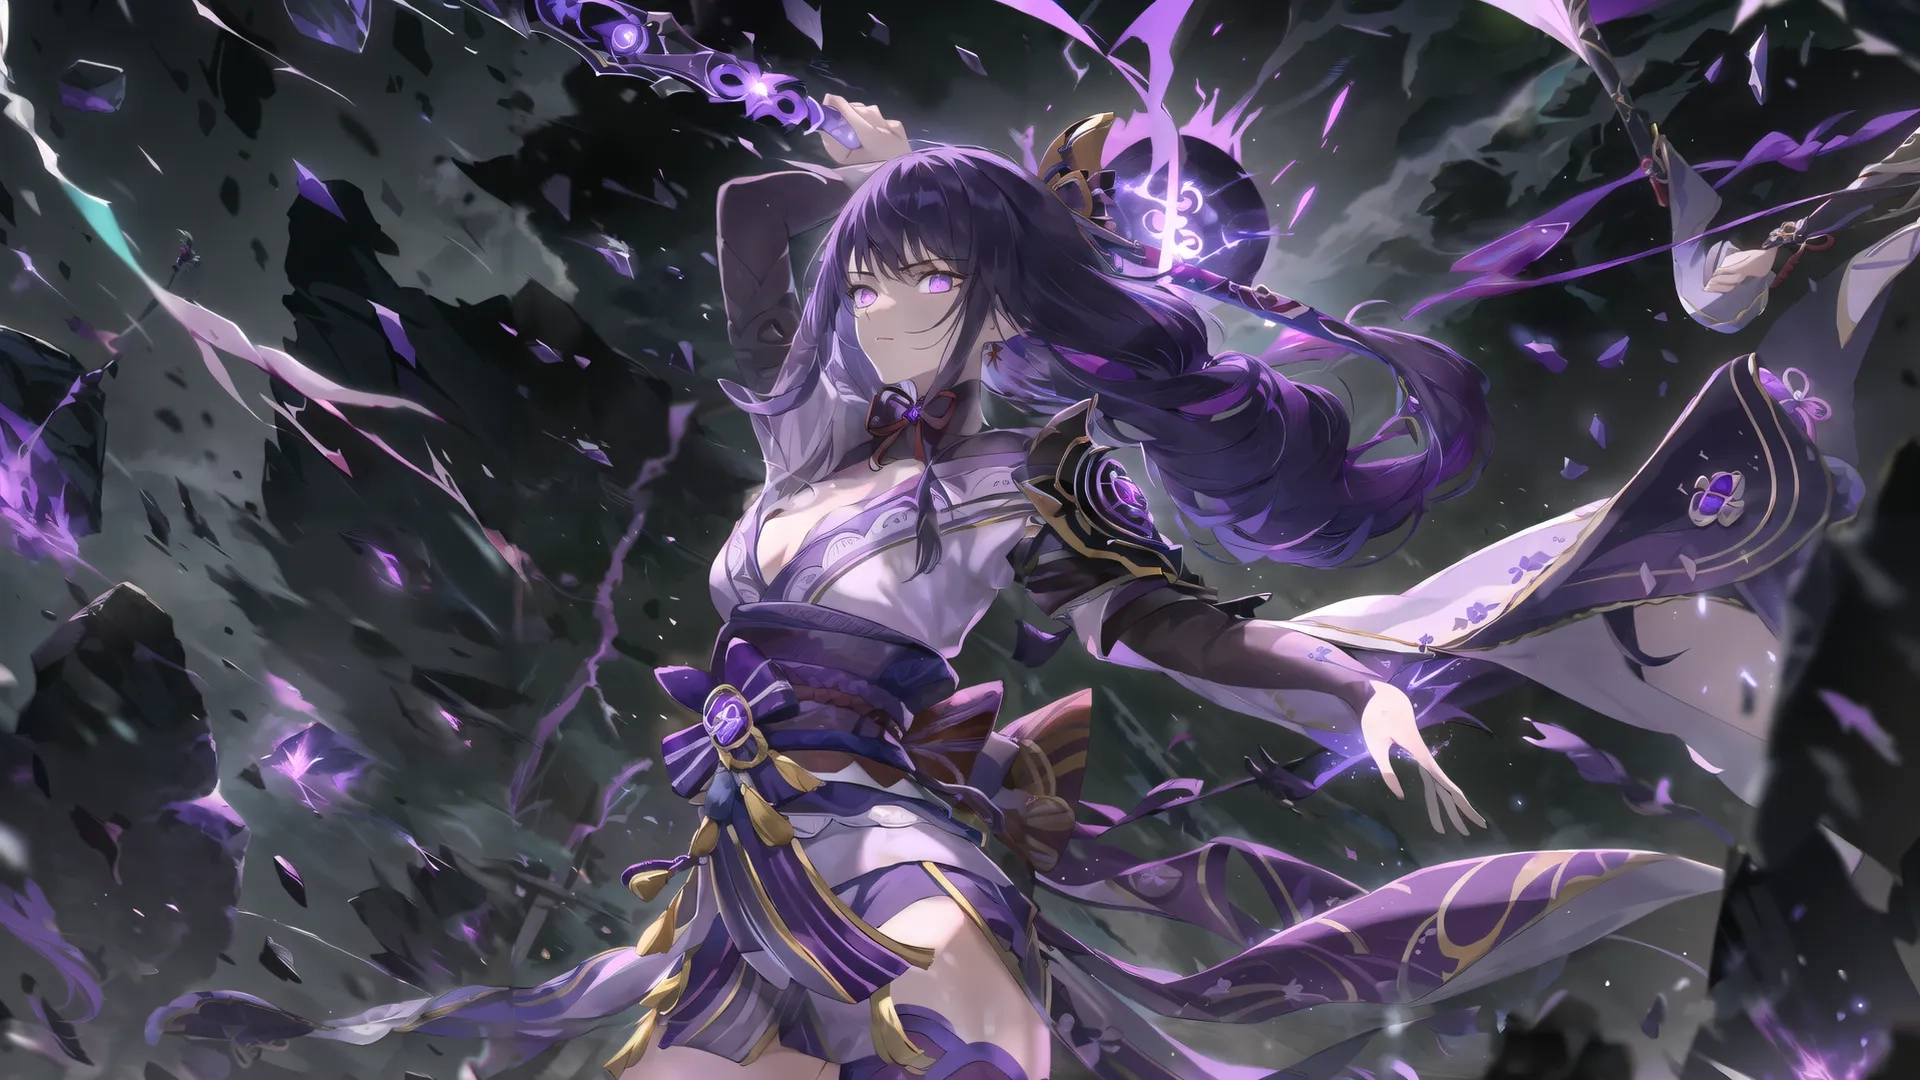 a girl in white dress holding a sword and wearing a feathered headpiece has purple hair and is surrounded by abstract black - colored decorations
